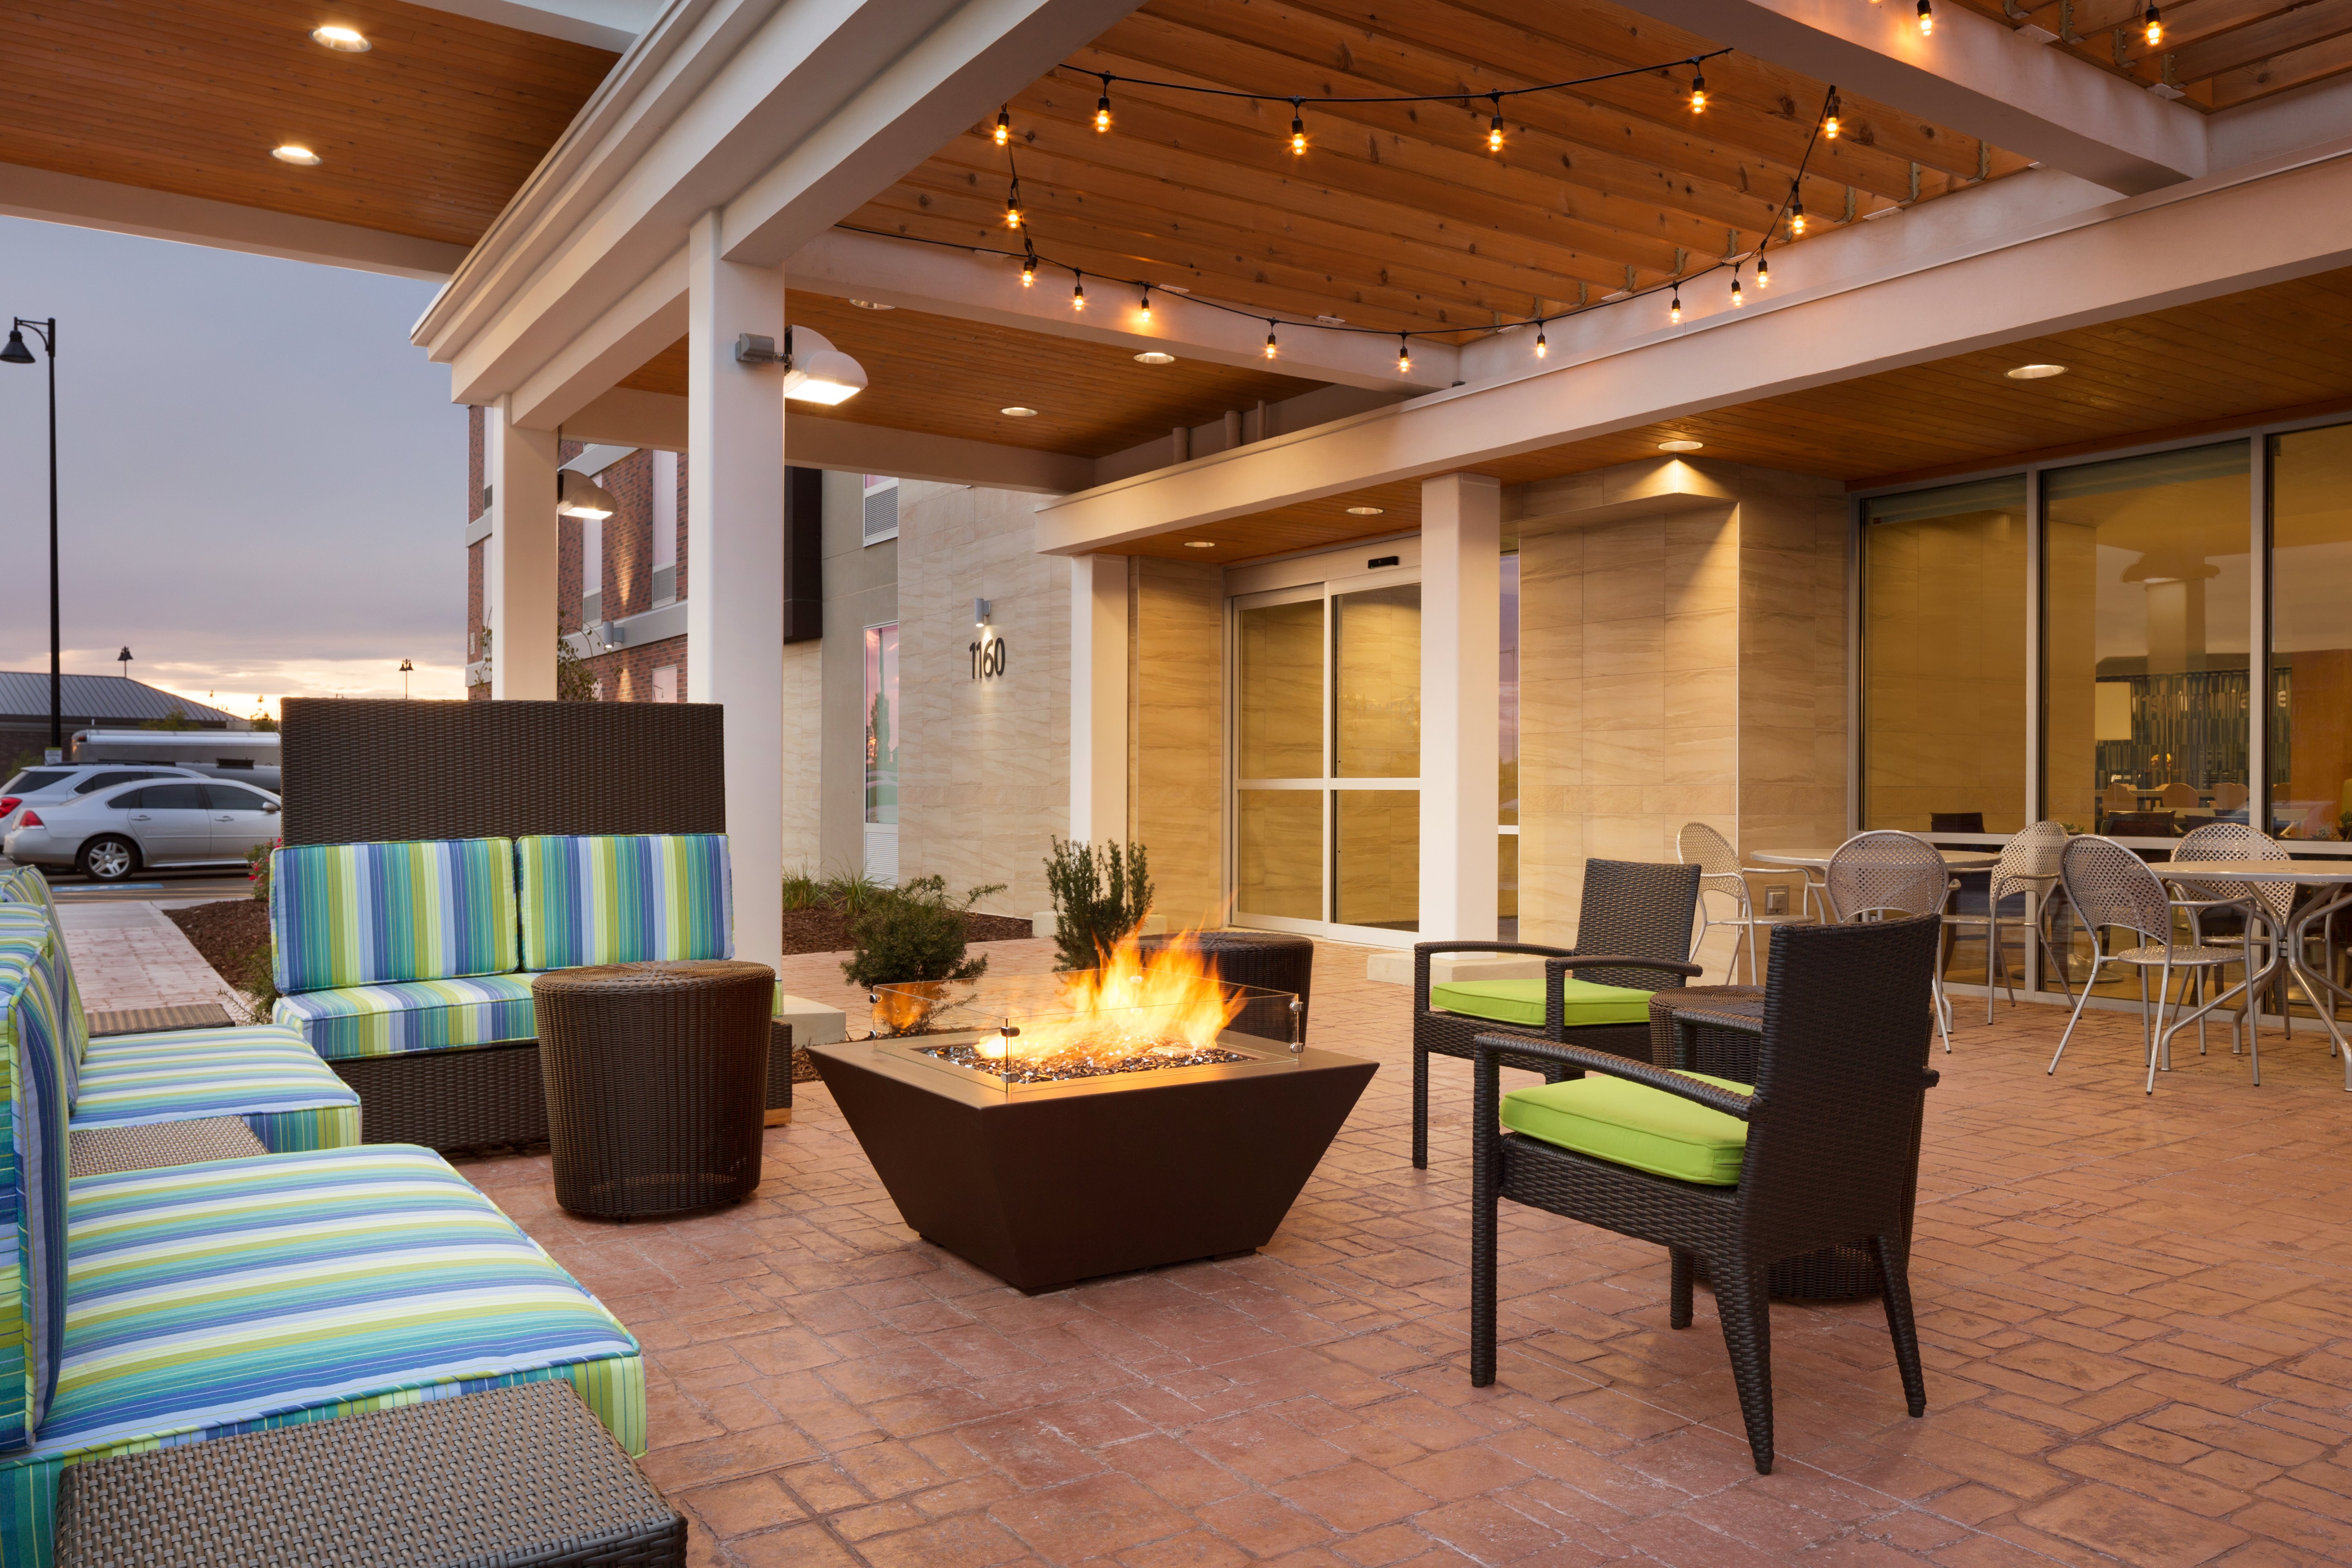 Illuminated Outdoor Lounge Area With Soft Seating Around Fire Pit, Additional Seating by Building and View of Guest Cars on Parking Lot at Dusk